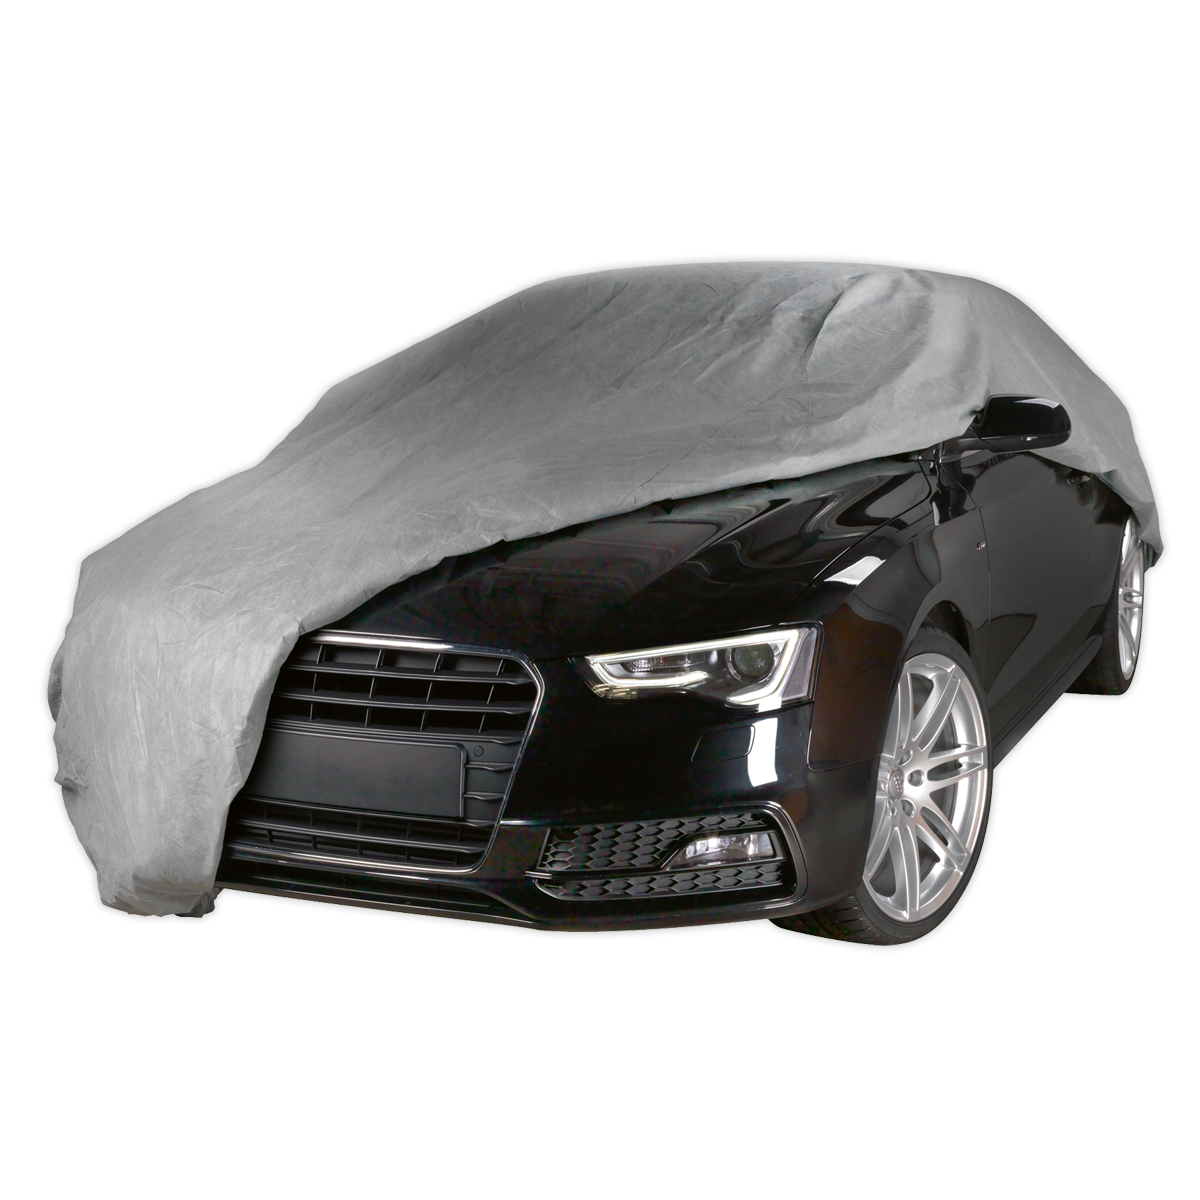 All-Seasons Car Cover 3-Layer - Extra-Large - SCCXL - Farming Parts